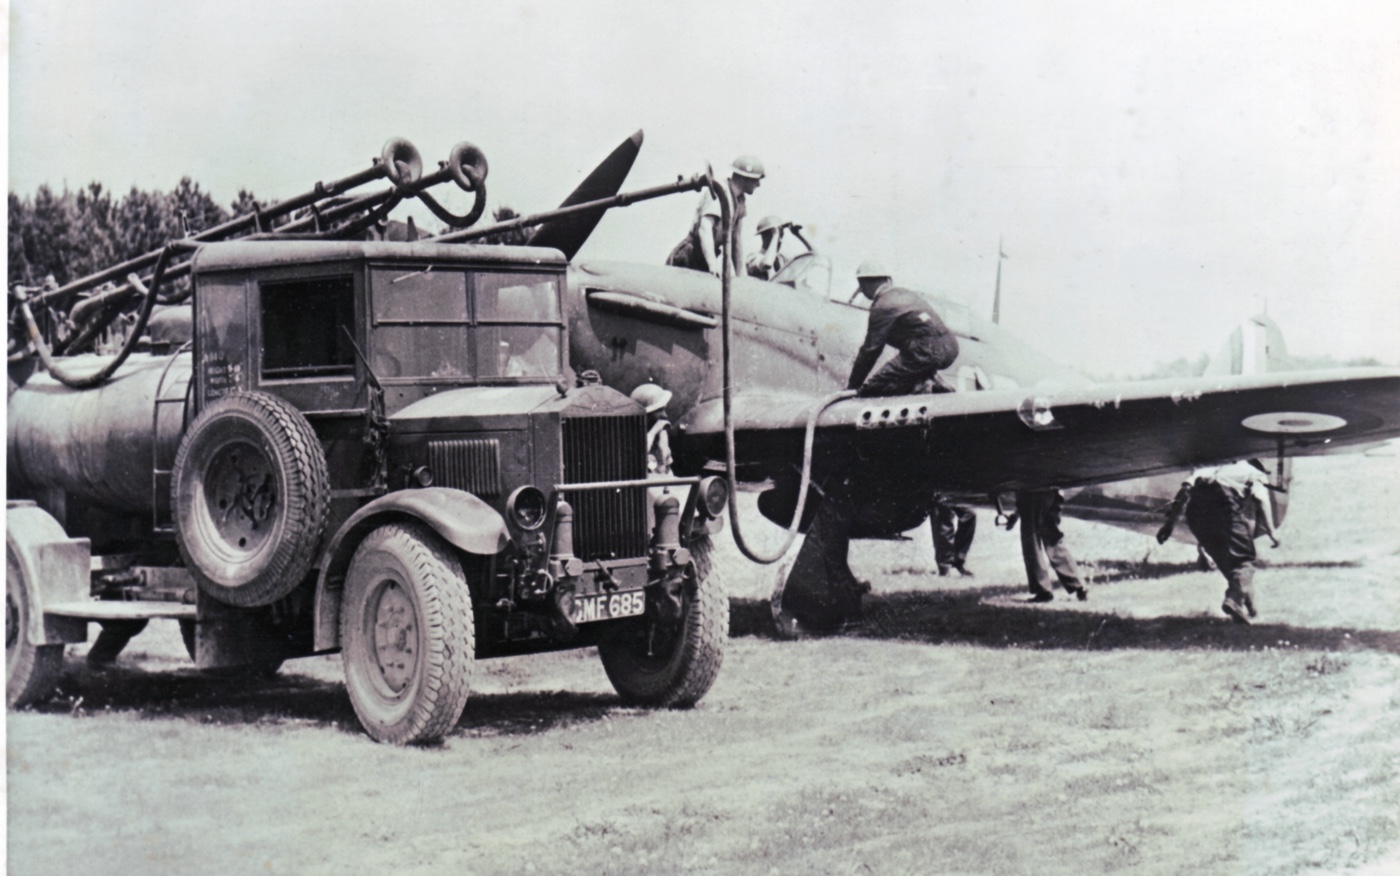 In this vintage photograph, RAF ground crews scramble to get a Hawker Hurricane reloaded during the Battle of Britain. 